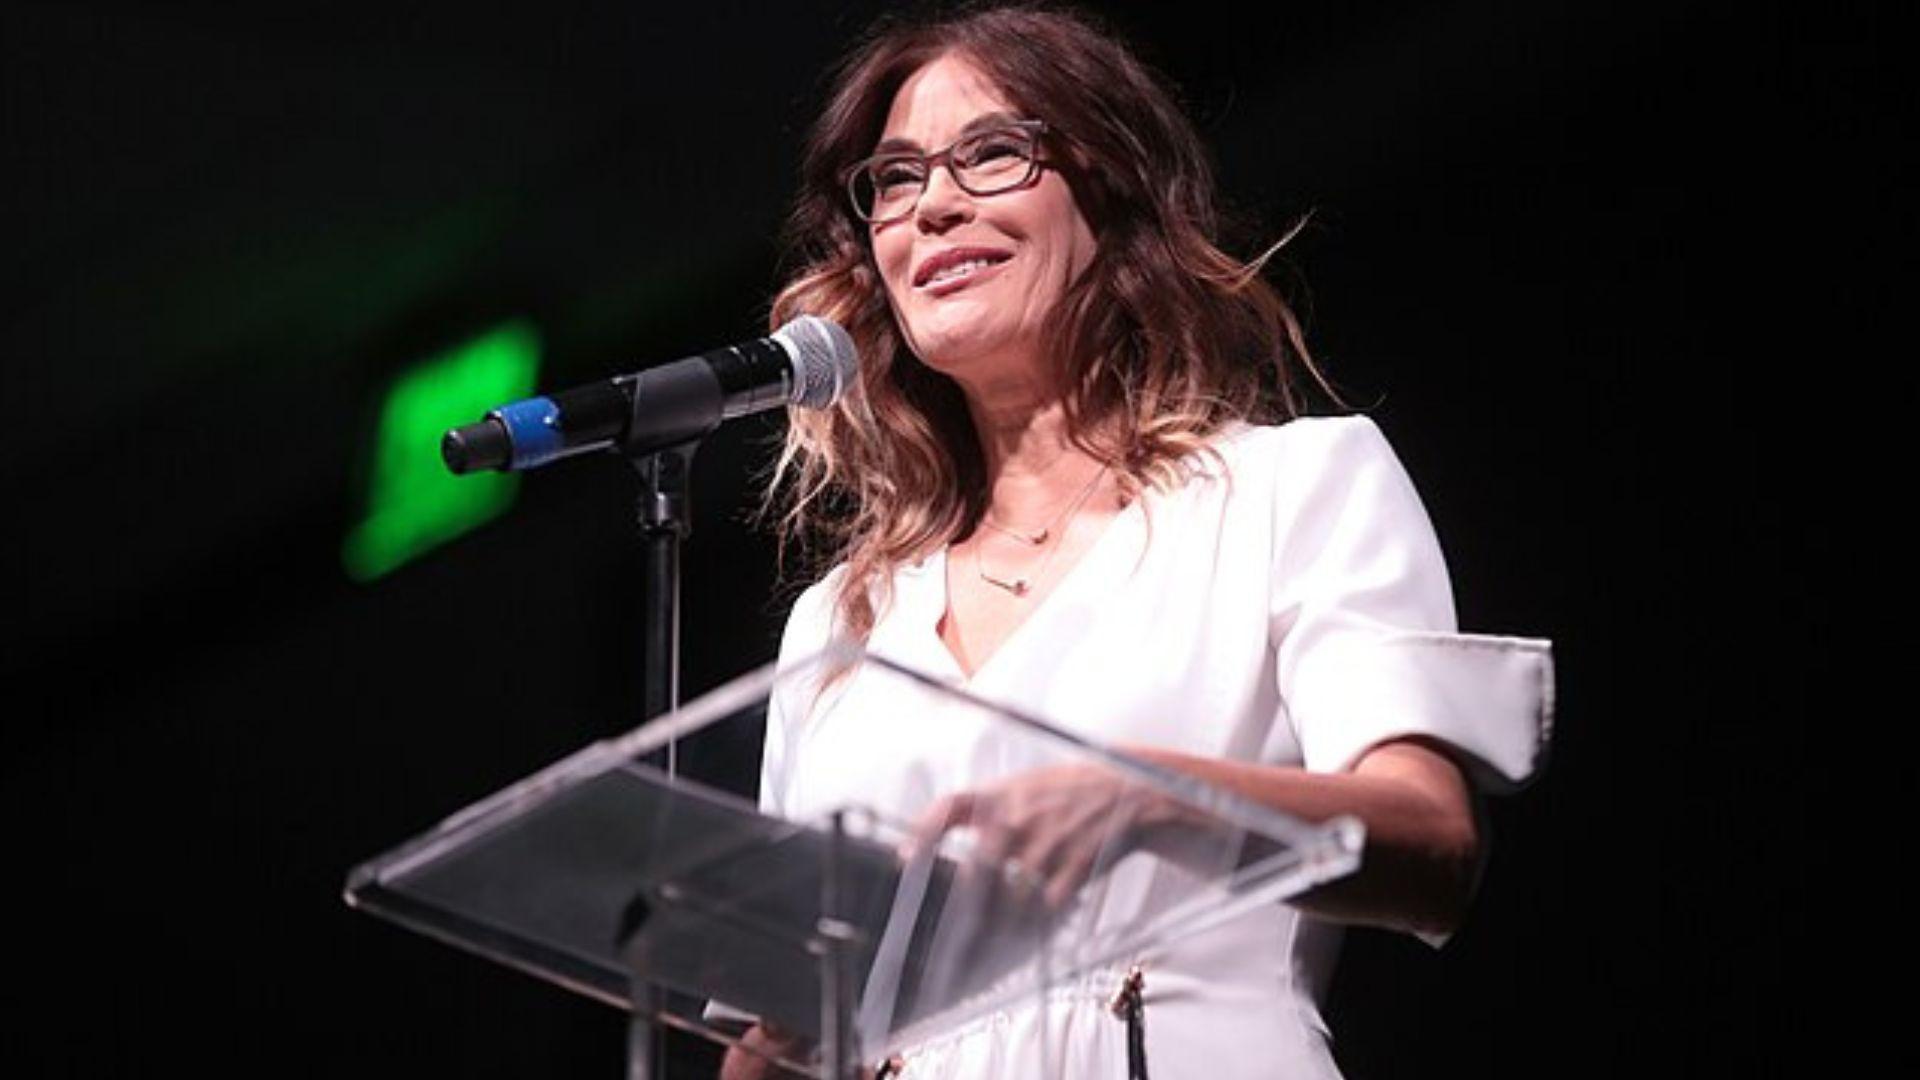 Teri Hatcher giving a talk. She is wearing a light pink dress and glasses and is standing behind a glass stand that has some paper and a microphone.